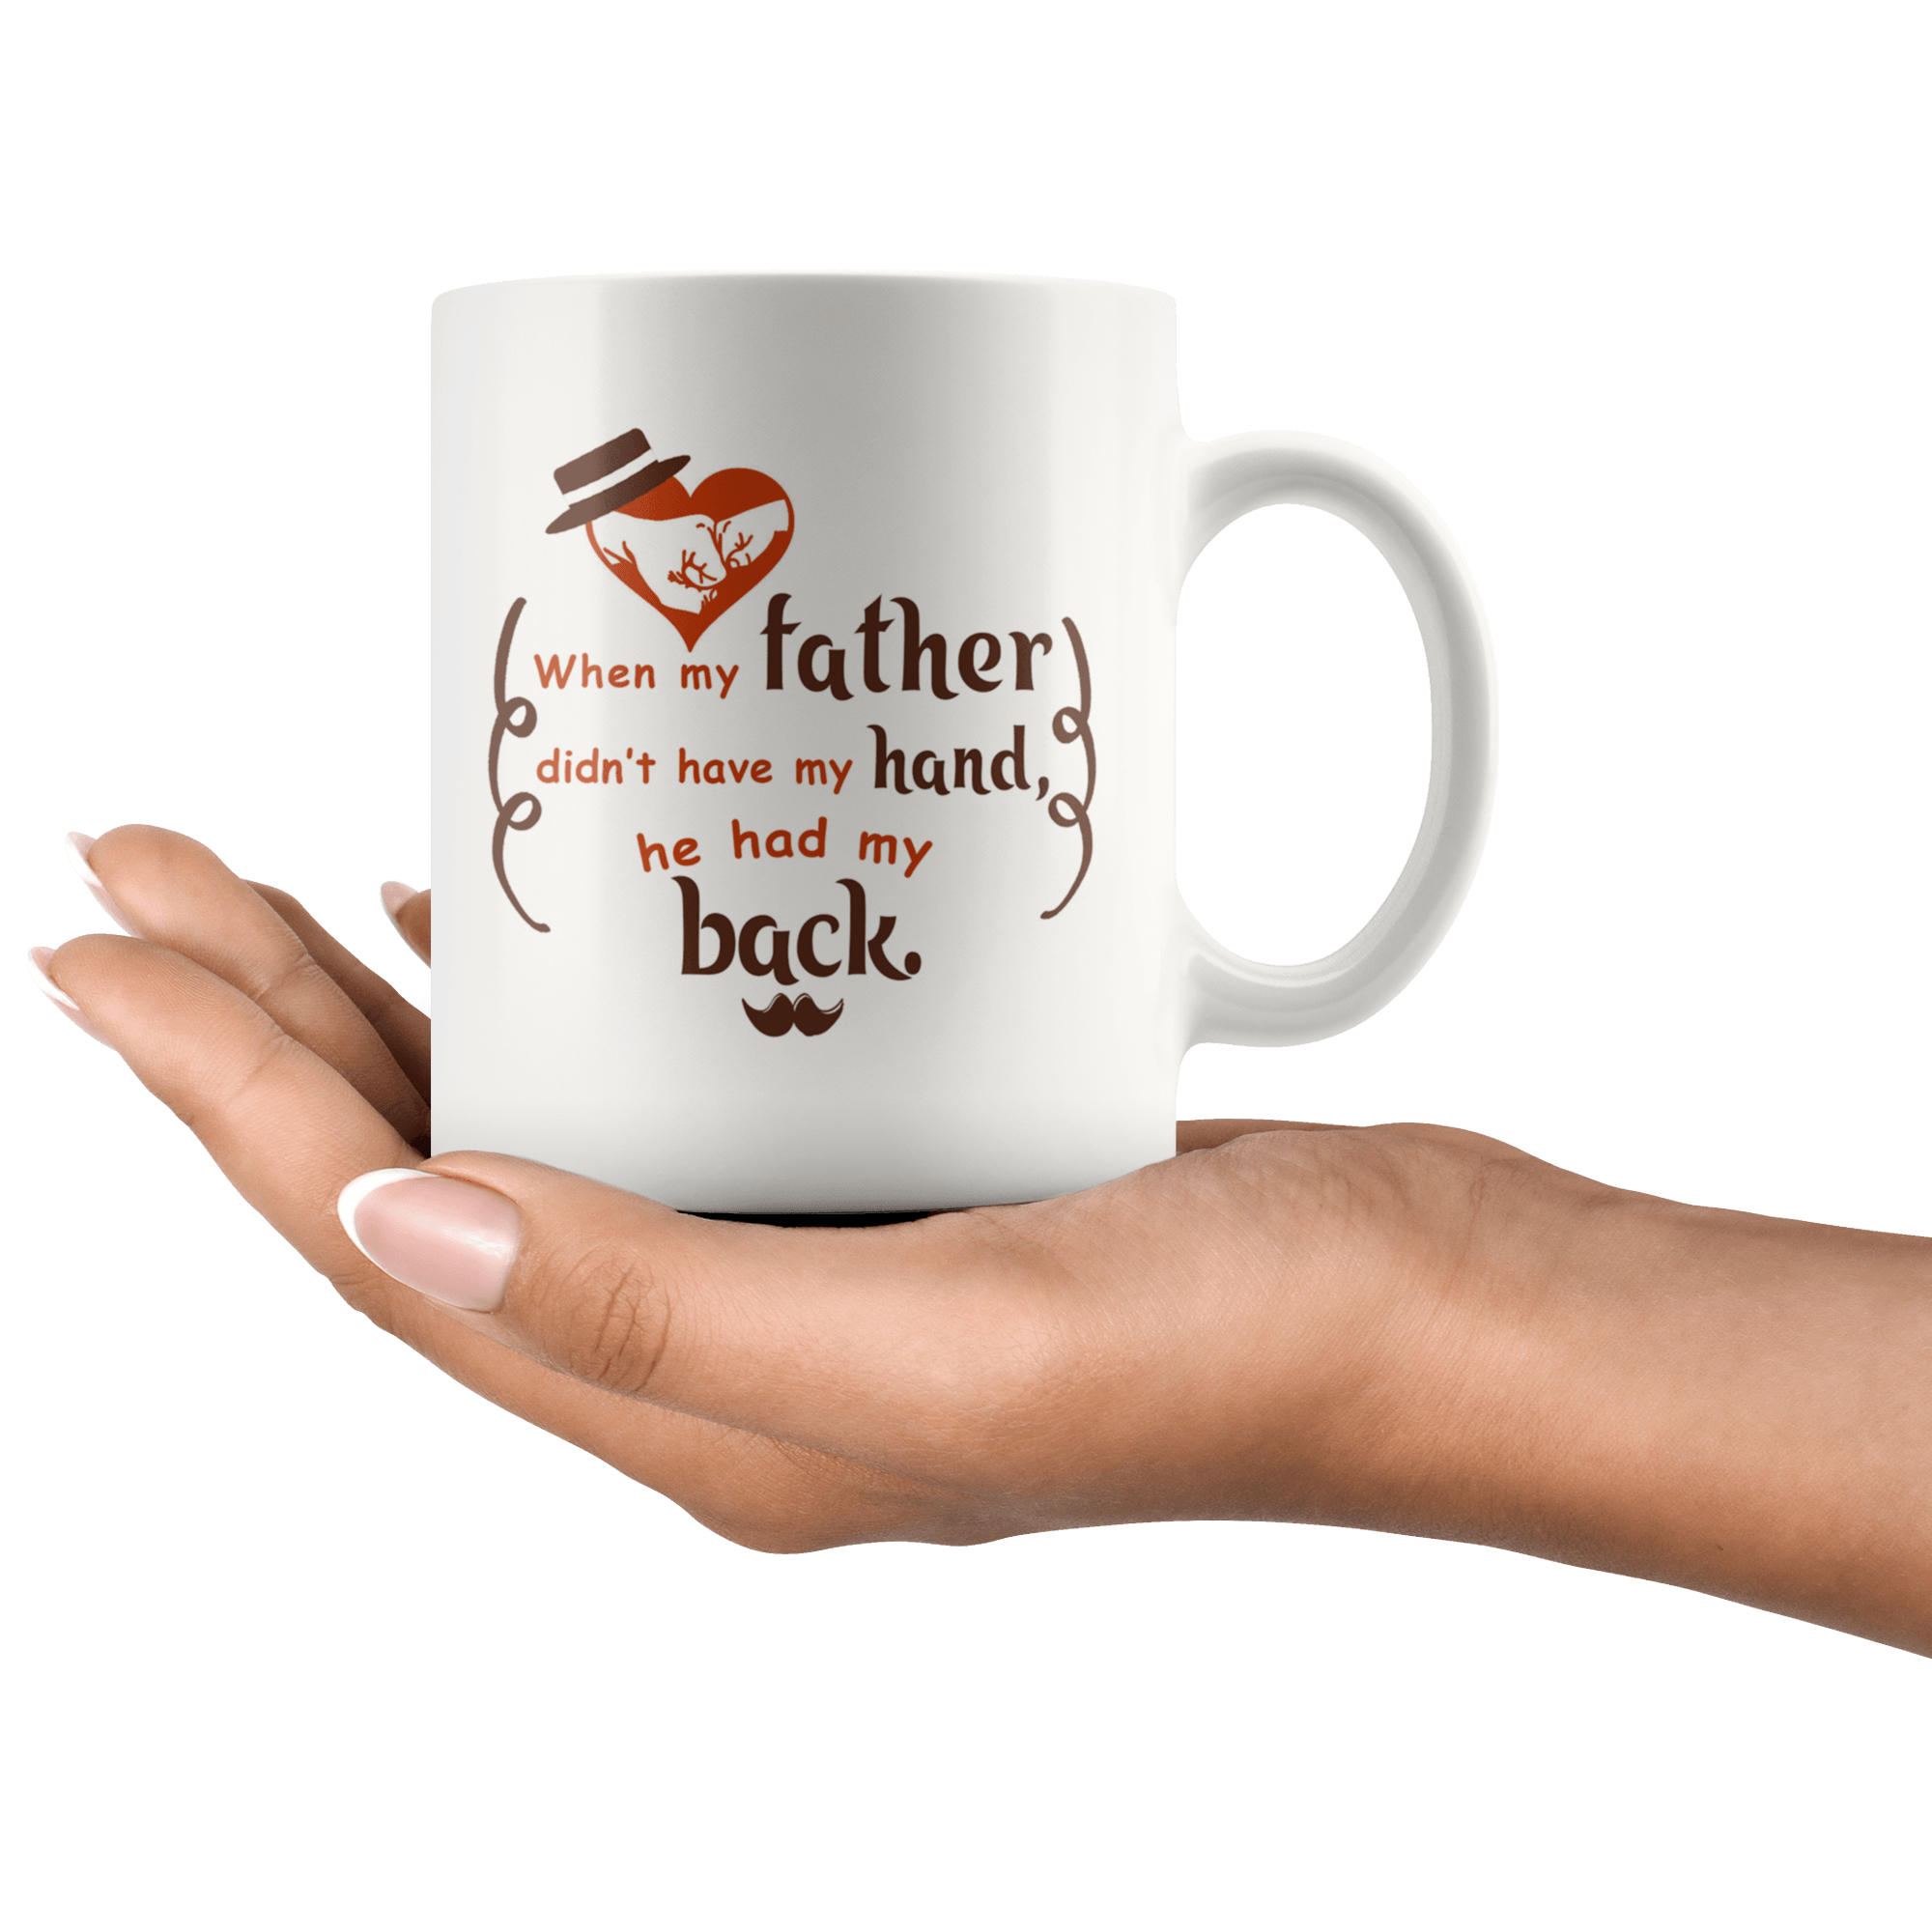 Great Coffee Mug For Father - When My Father Didn’t Have My Hand, He Had My Back - SPCM